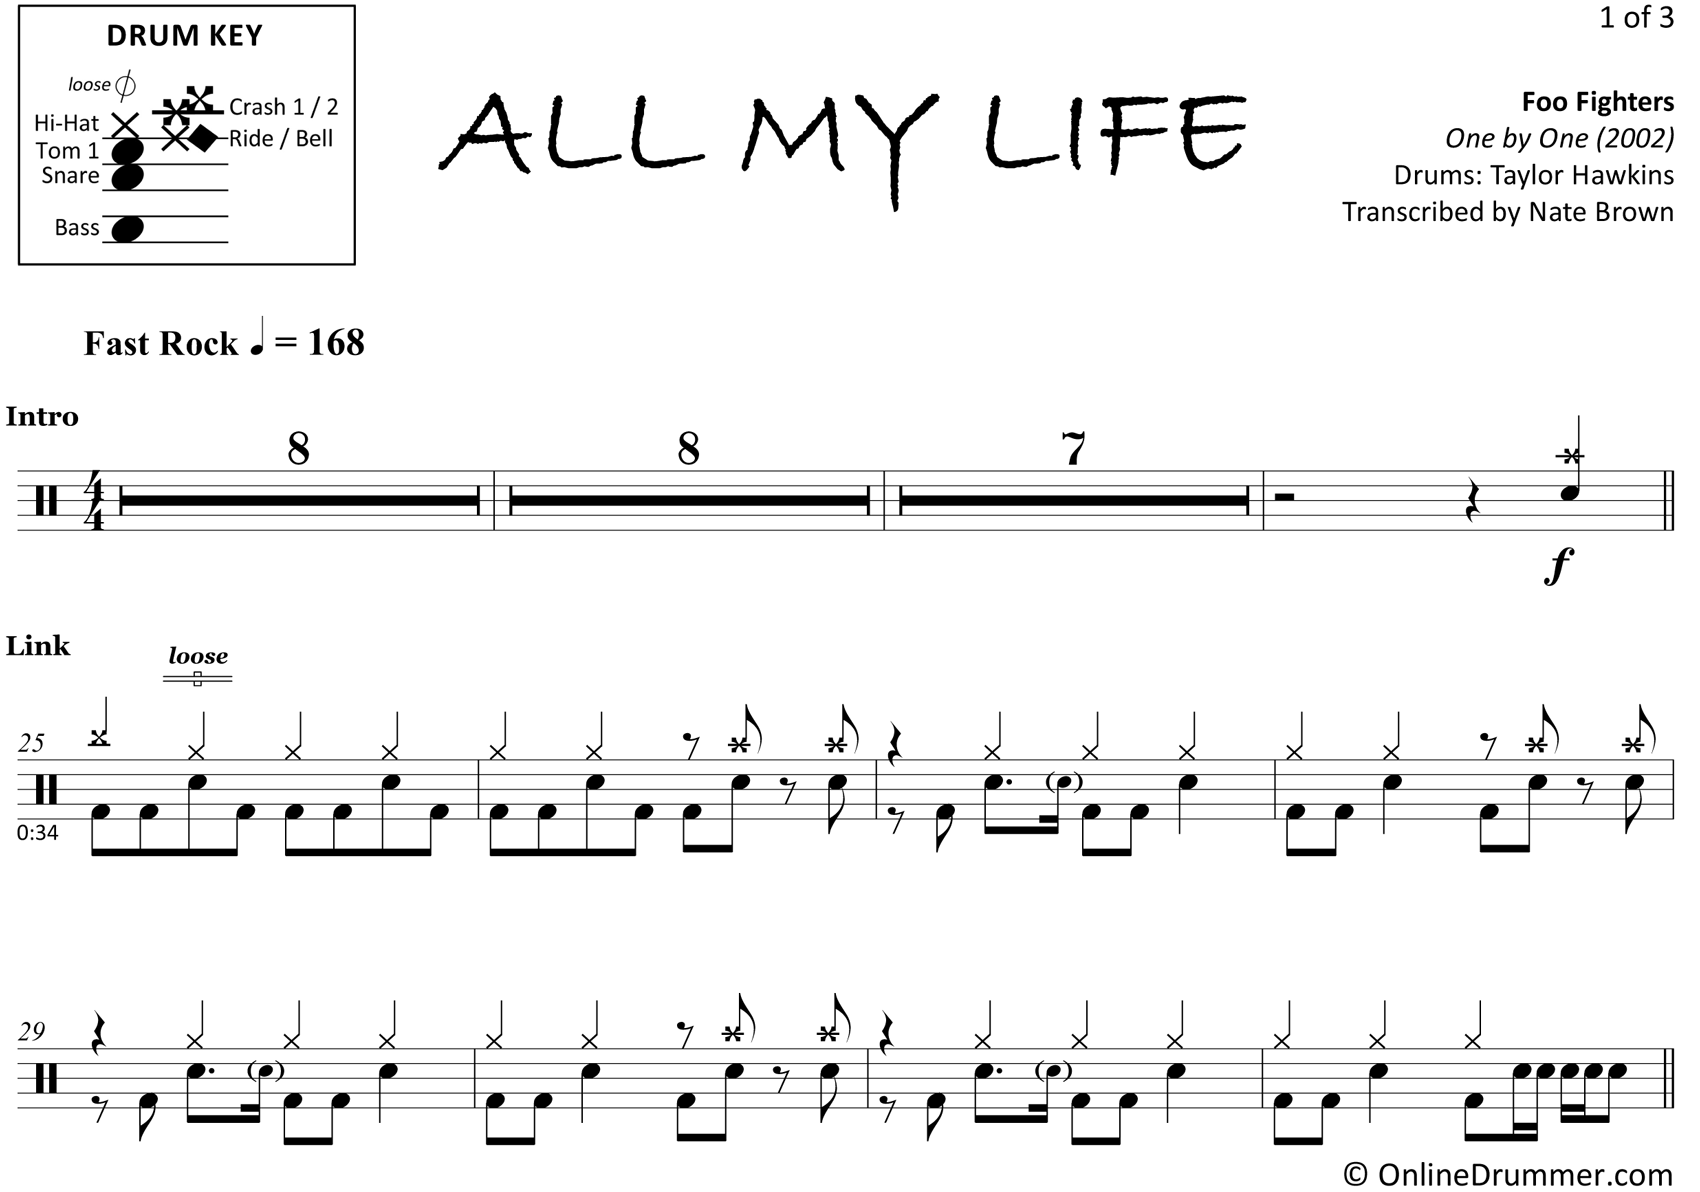 All My Life - Foo Fighters - Drum Sheet Music